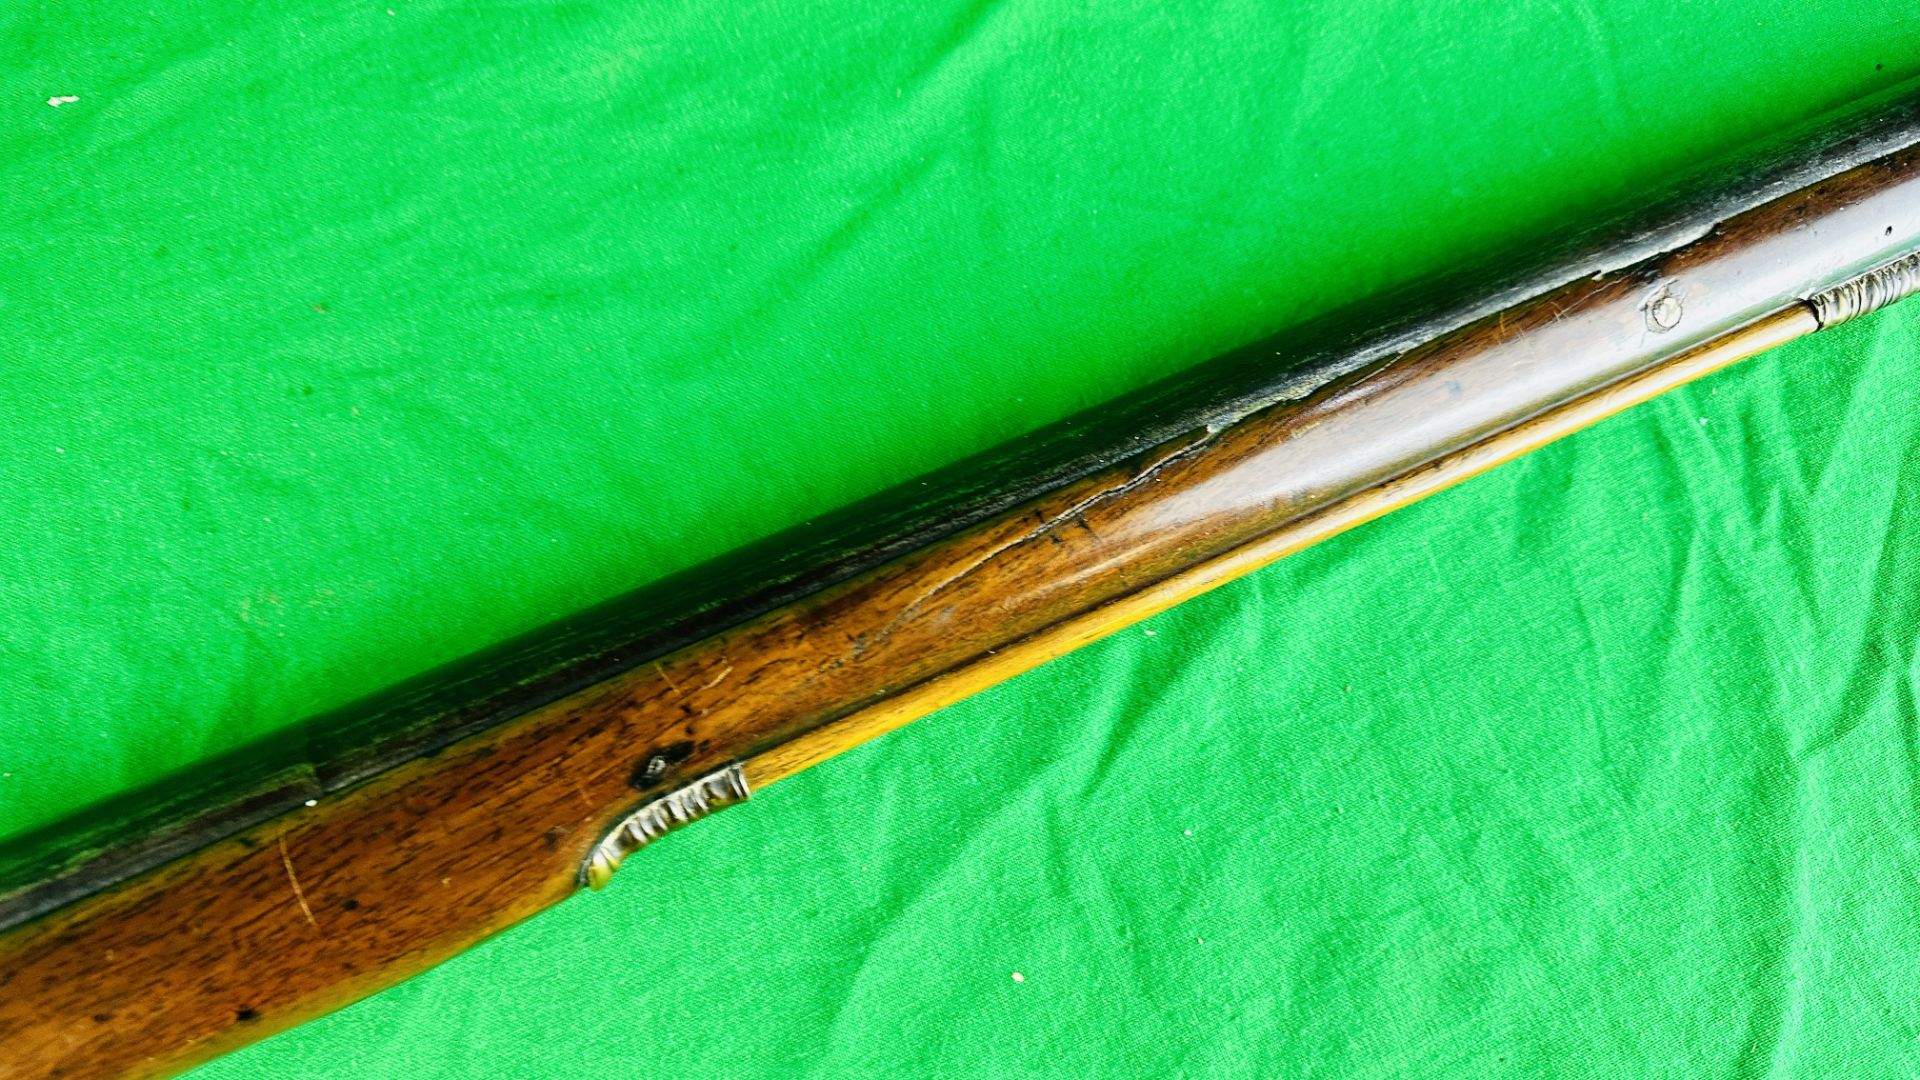 ANTIQUE PERCUSSION CAP MUZZLE LOADING SHOTGUN WITH LOADING ROD -COLLECTORS PIECE, - Image 6 of 18